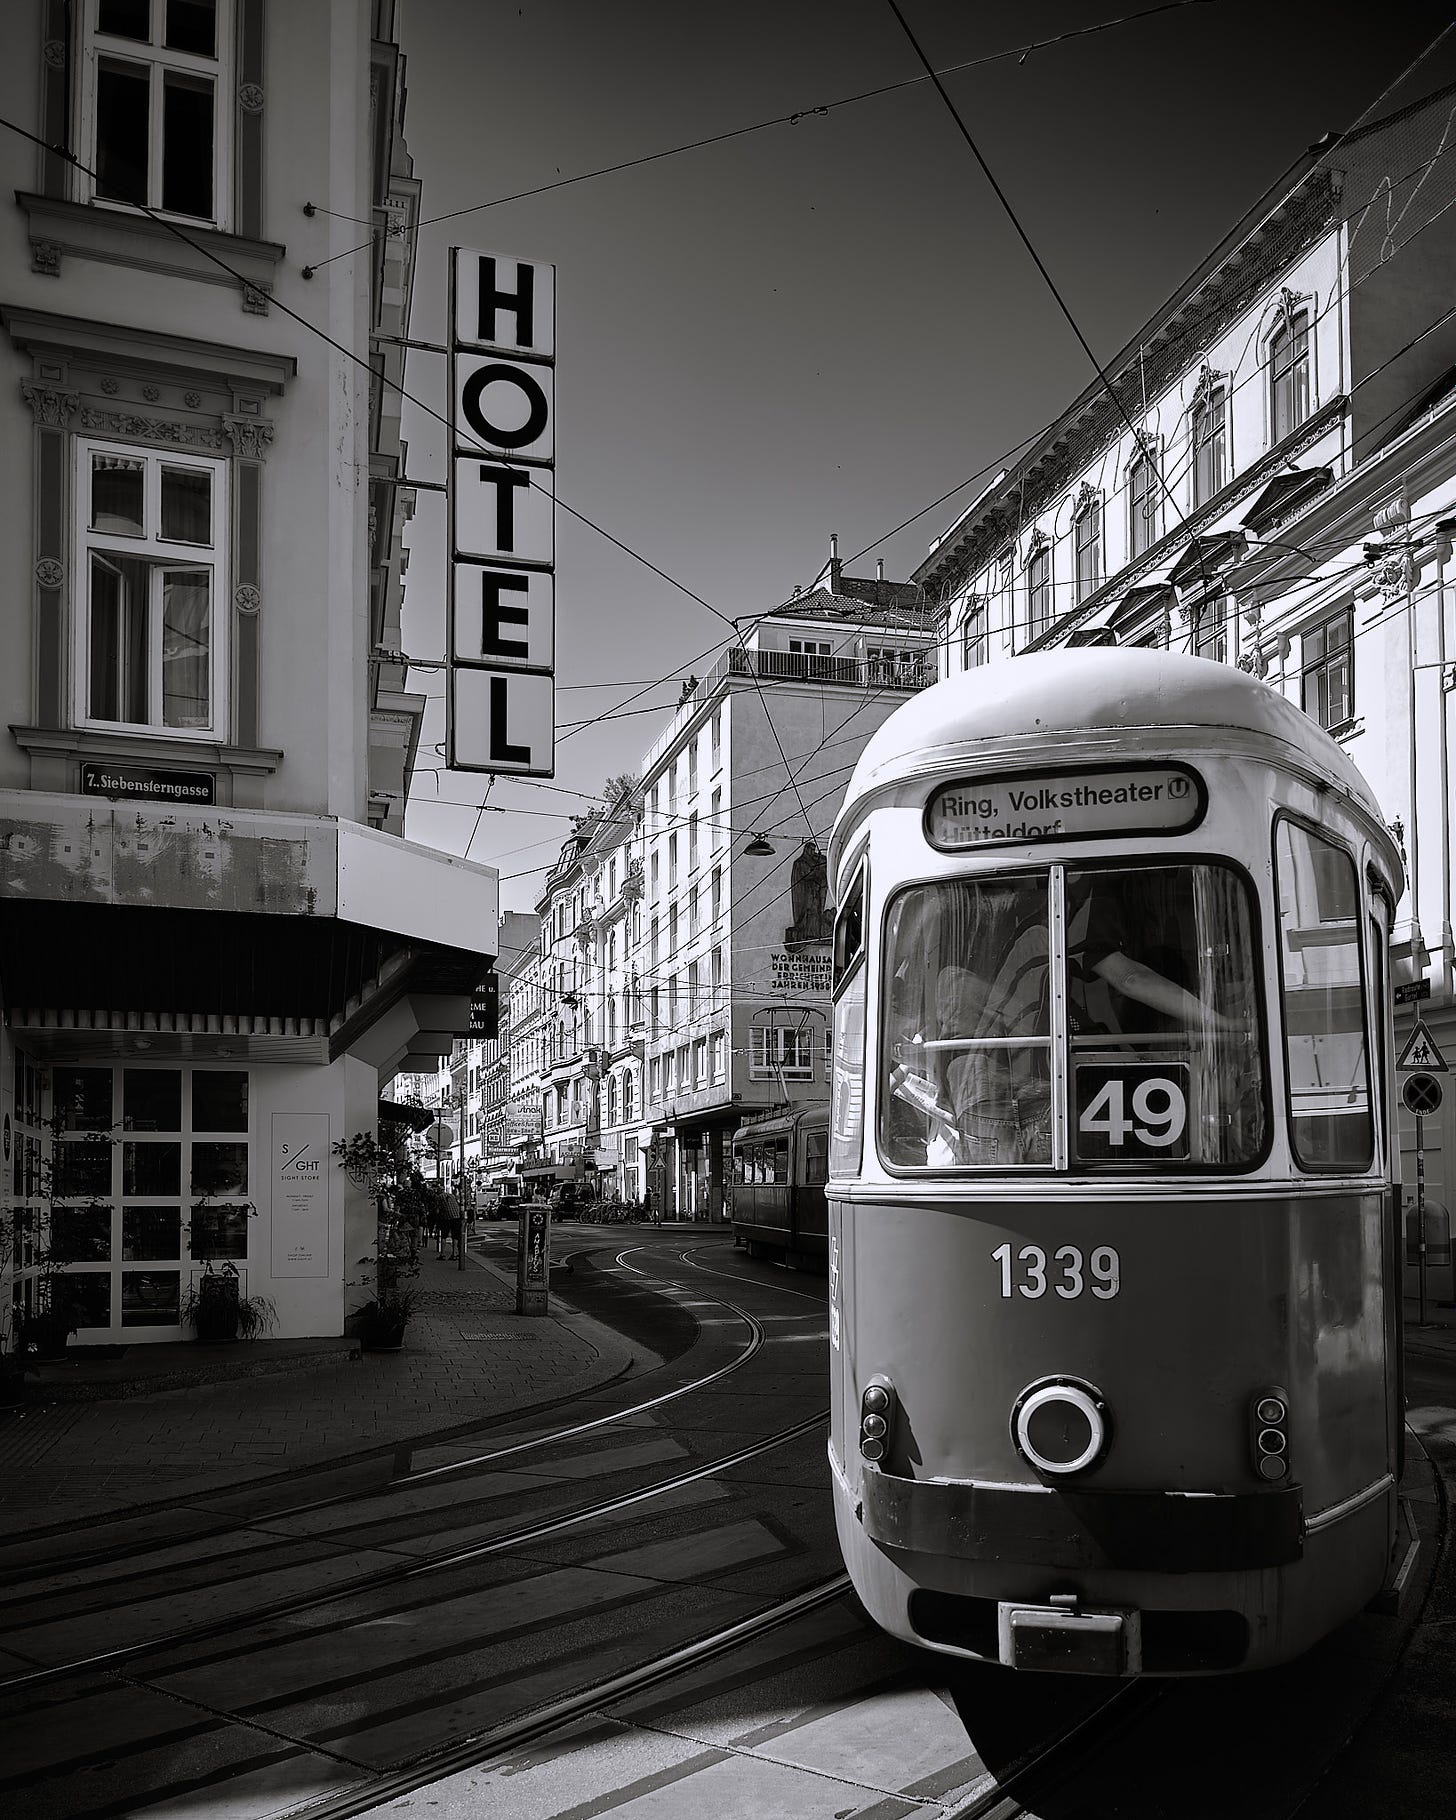 Black and white photograph of a Vienna cityscape featuring a tram marked '49' approaching a stop. Prominent 'HOTEL' sign is displayed vertically on a building to the left, while tram tracks curve through the cobbled streets and historical buildings line the backdrop.